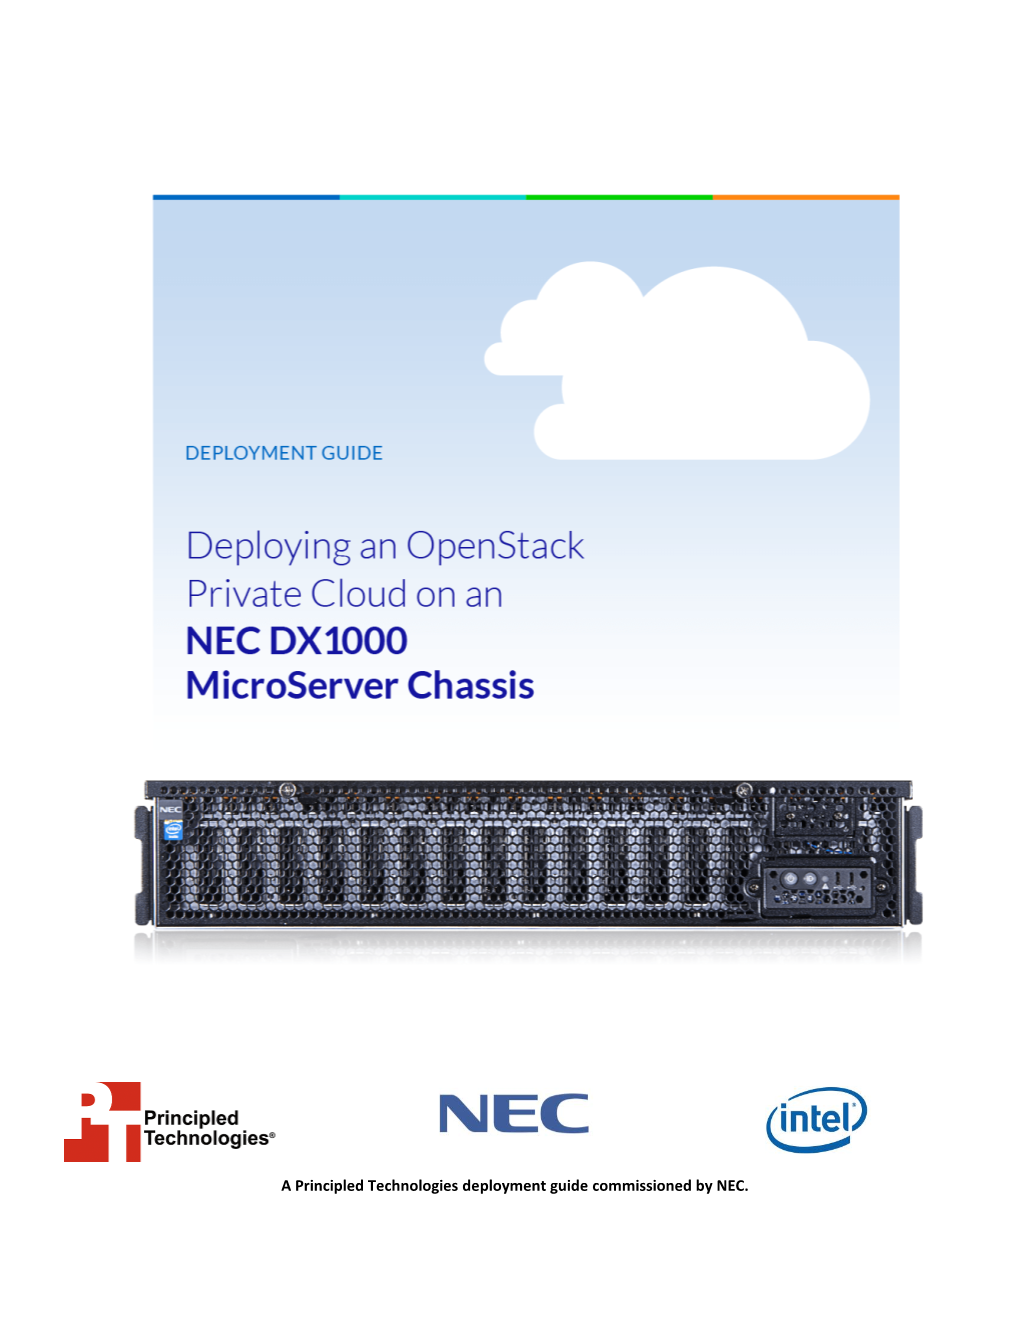 Deploying Openstack Private Cloud on NEC DX1000 Microserver Chassis